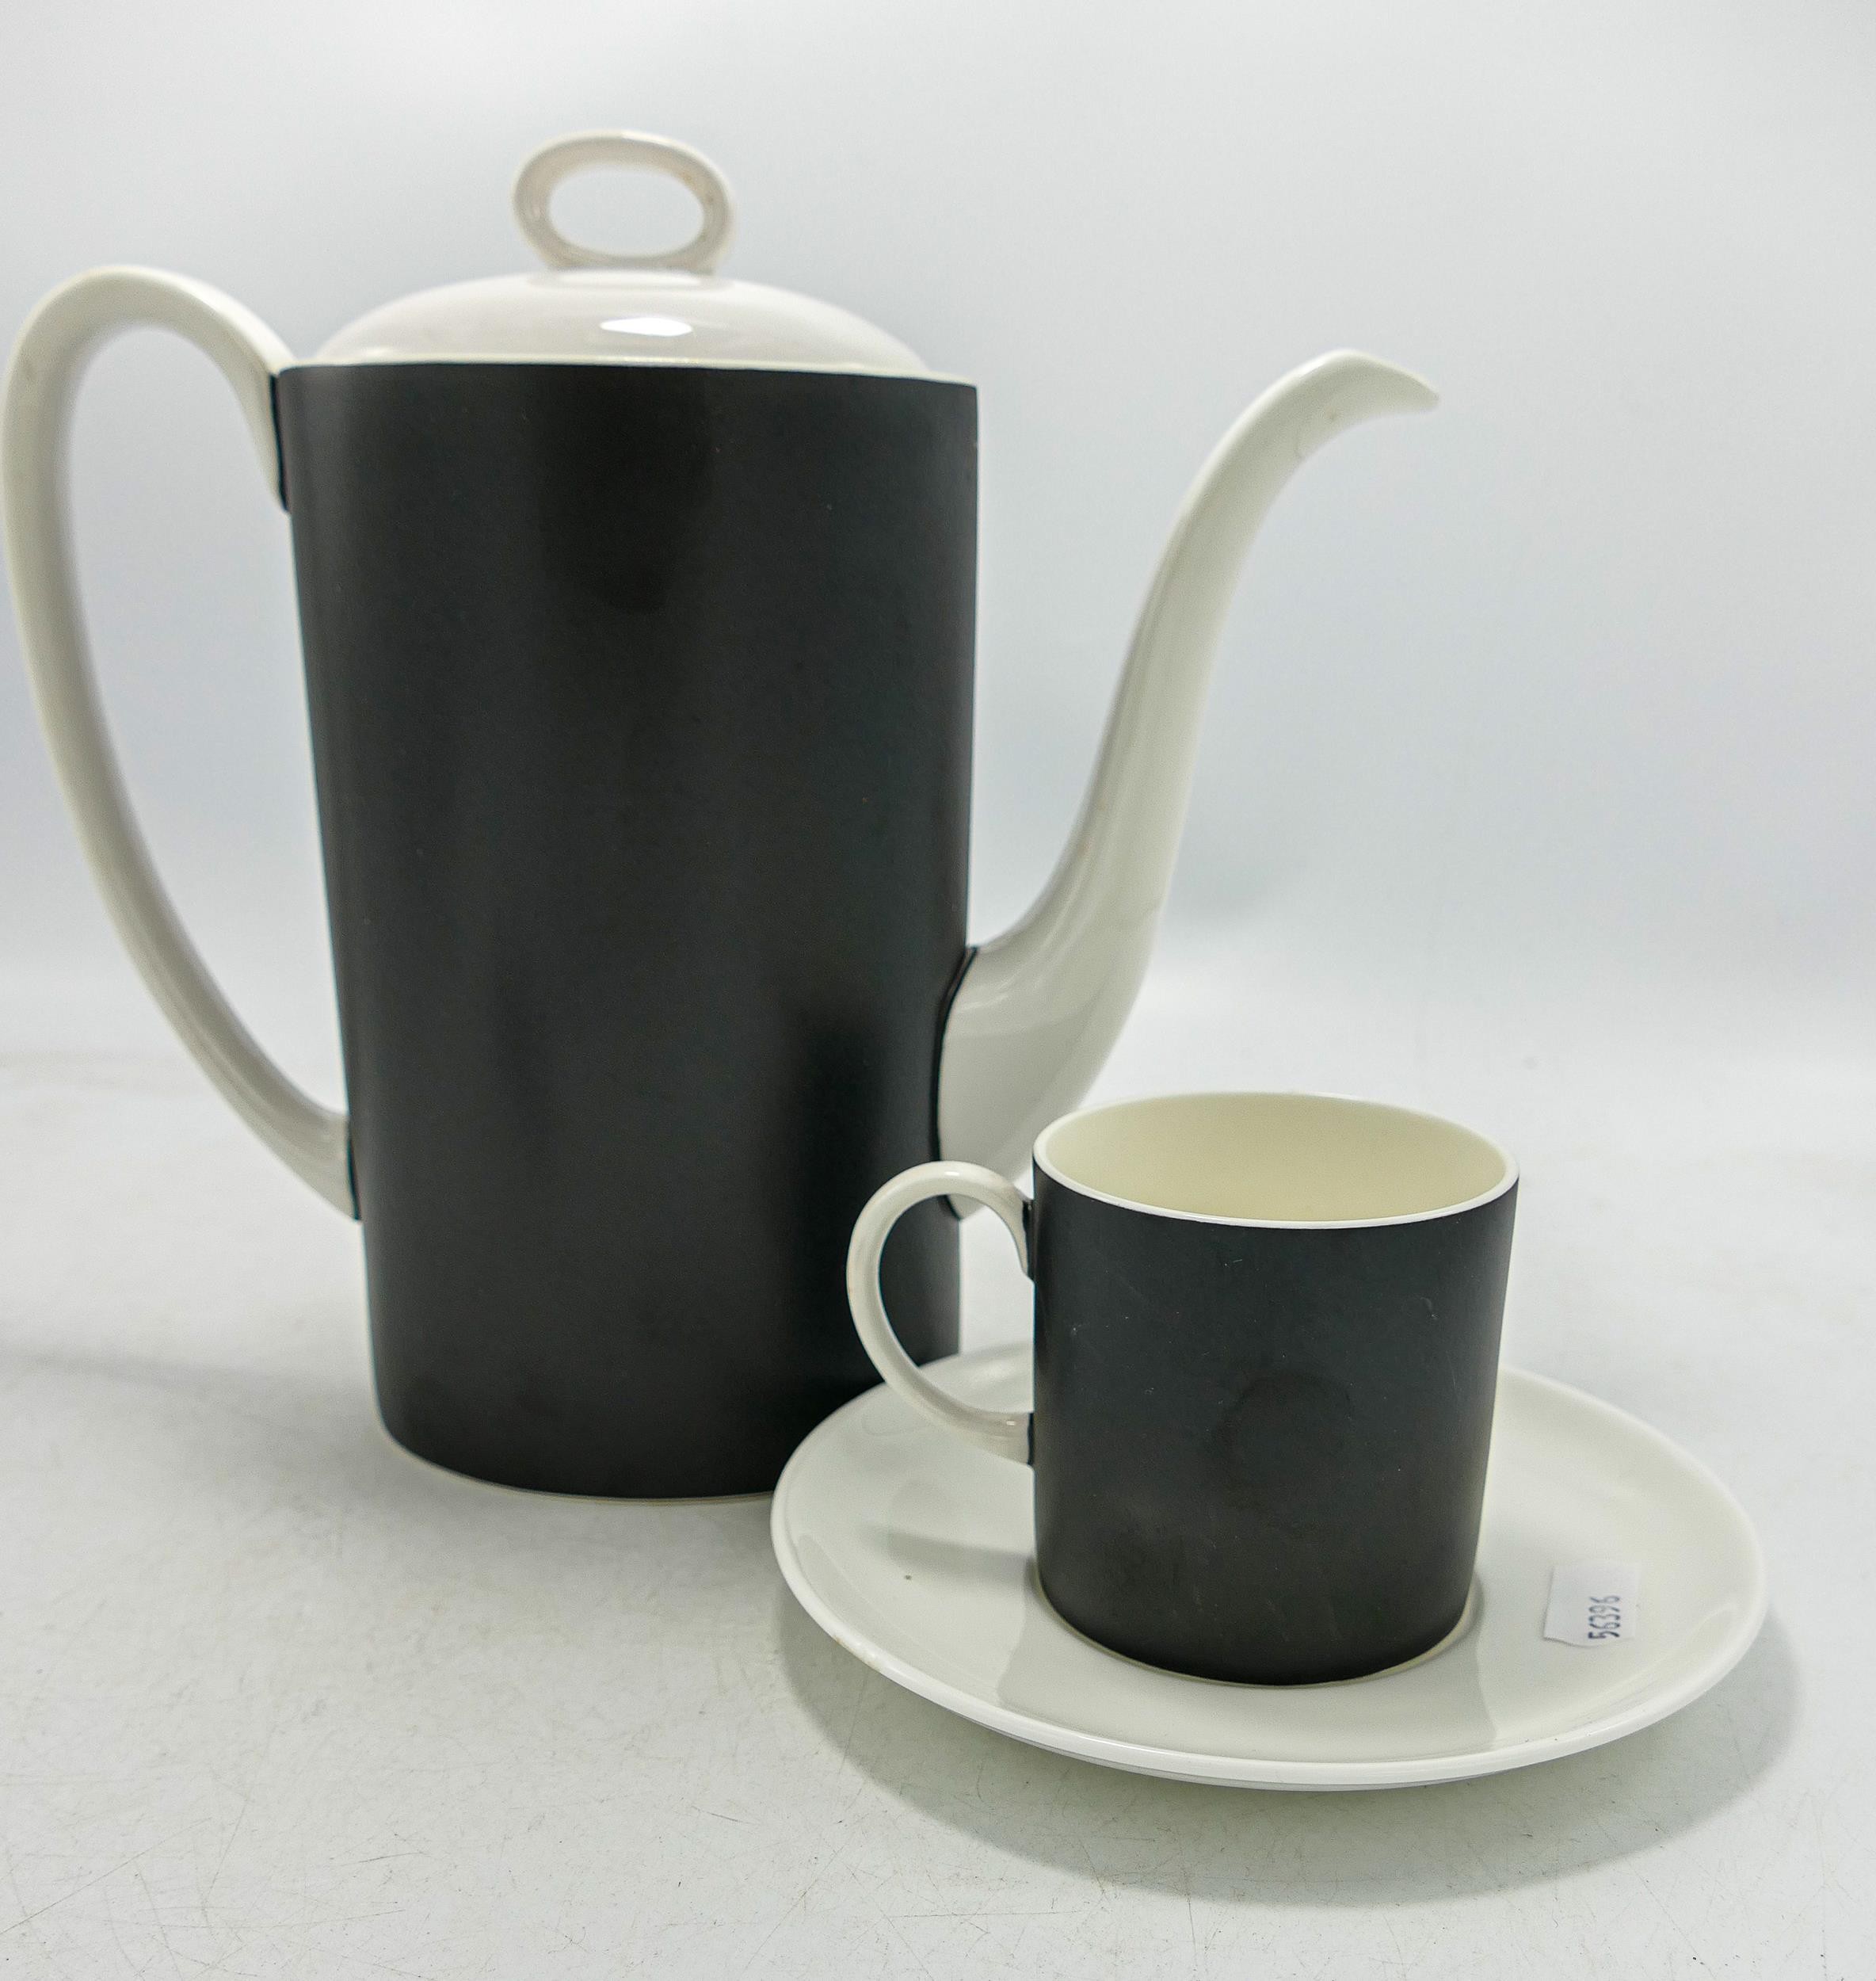 Susie Cooper Contrast dinnerware C2068, to include - 5 cups and saucers, coffee pot, cream jug and